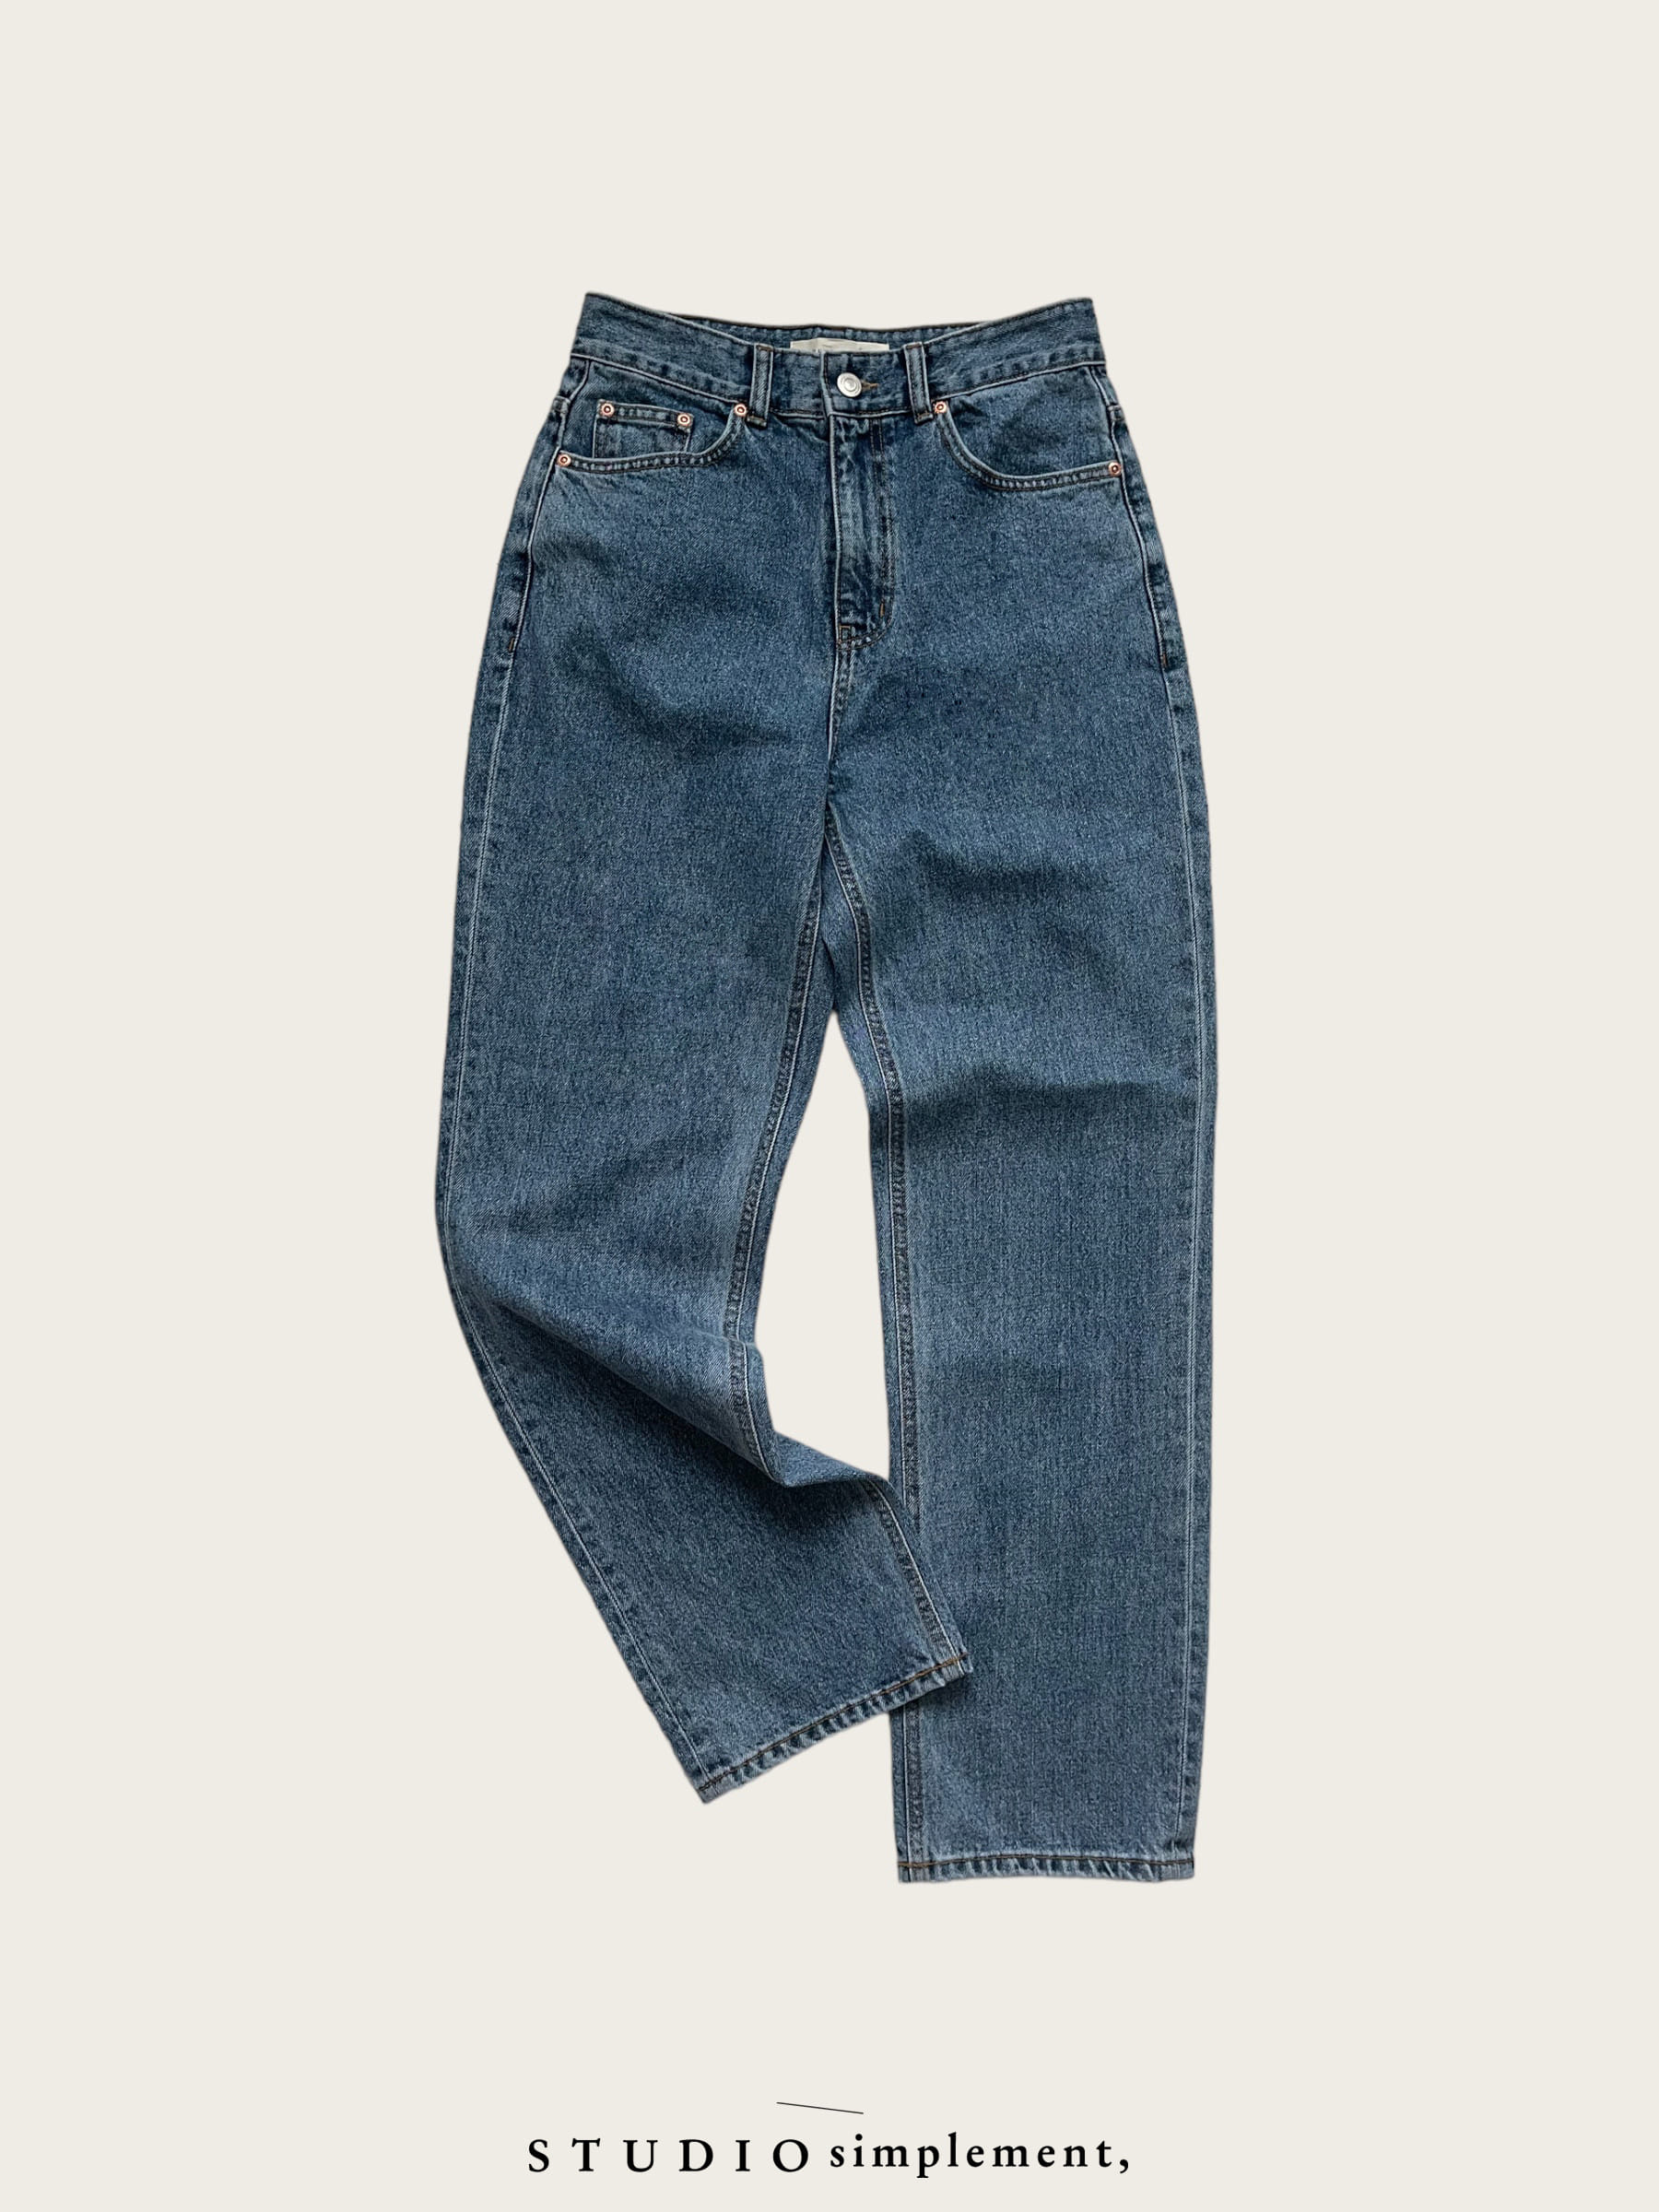 314 Romy Blue Jeans (Recycled cotton denim)